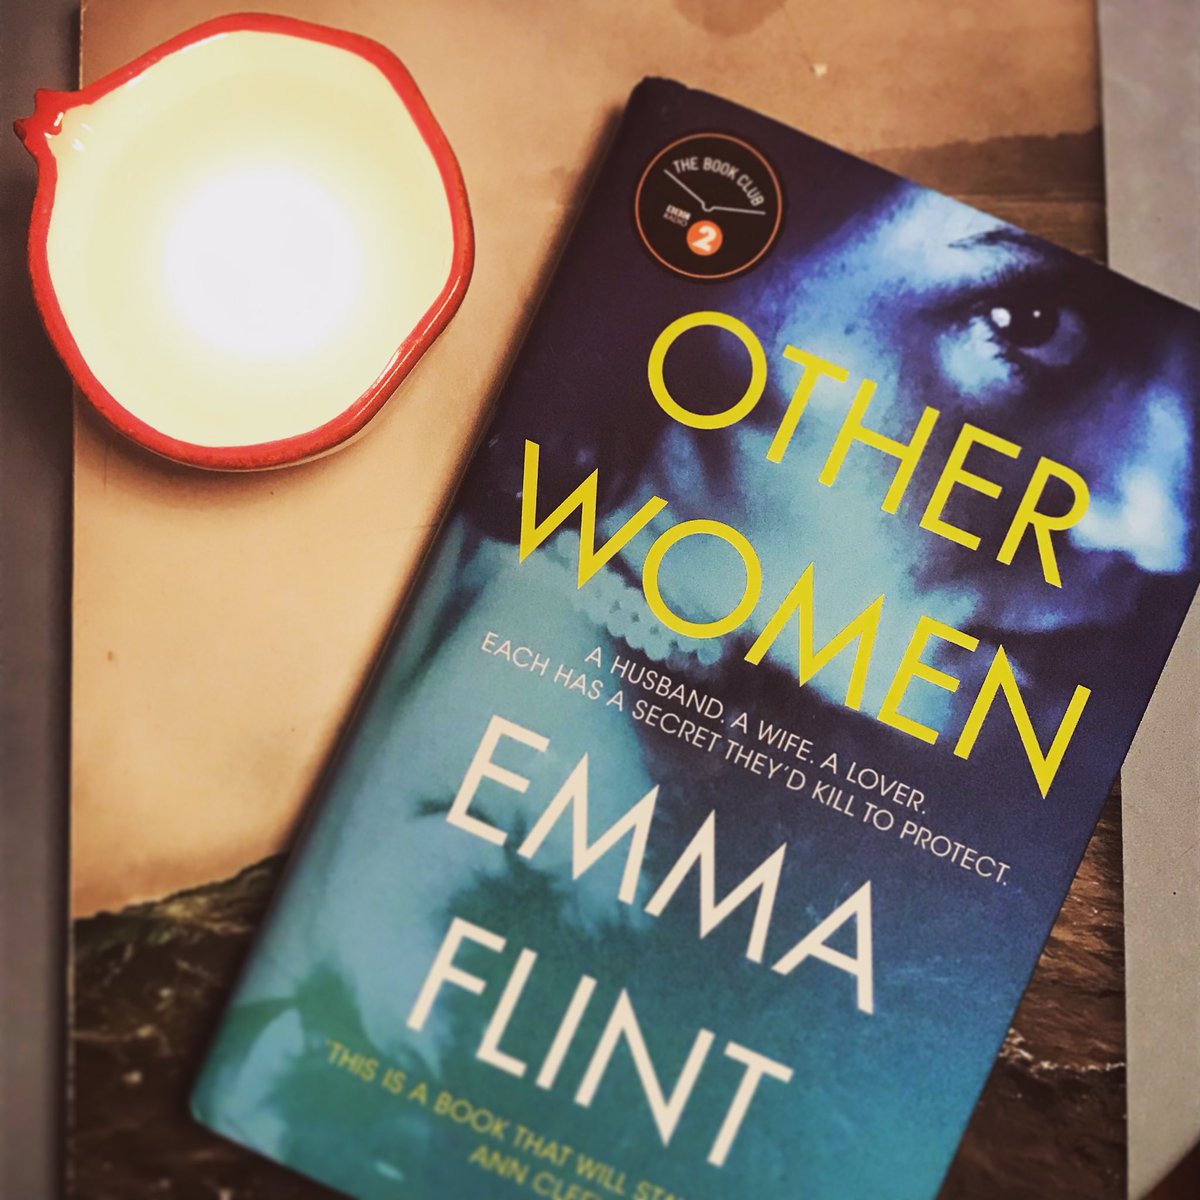 After months of keeping out of bookshops, I let myself get a few treats including #OtherWomen - a book I’ve been looking forward to for literal years!  #BookTwitter #NewBook